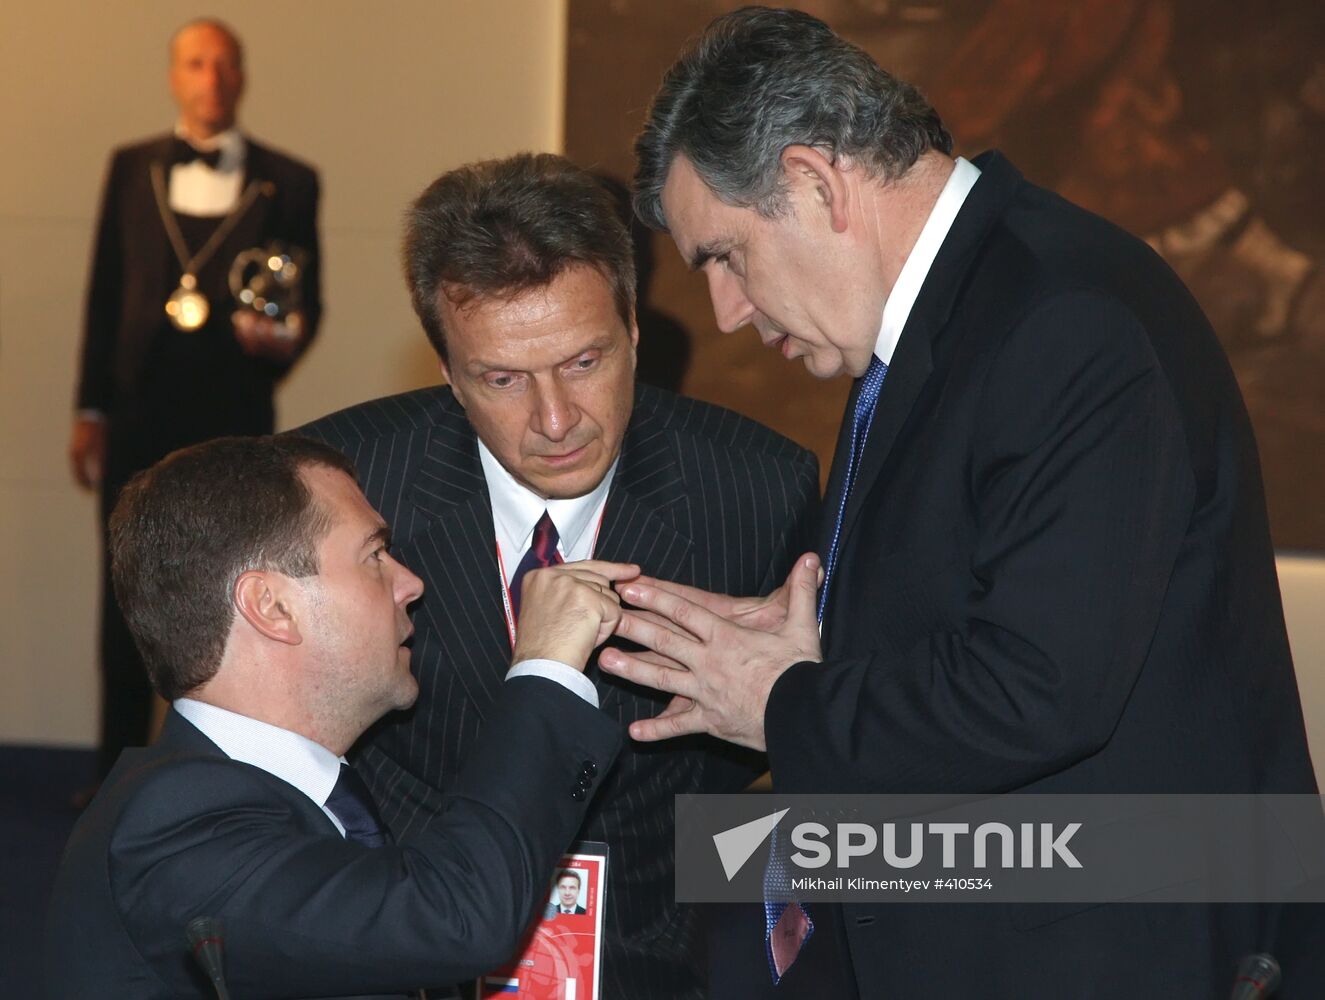 Russian President Dmitry Medvedev at the 2009 G8 summit